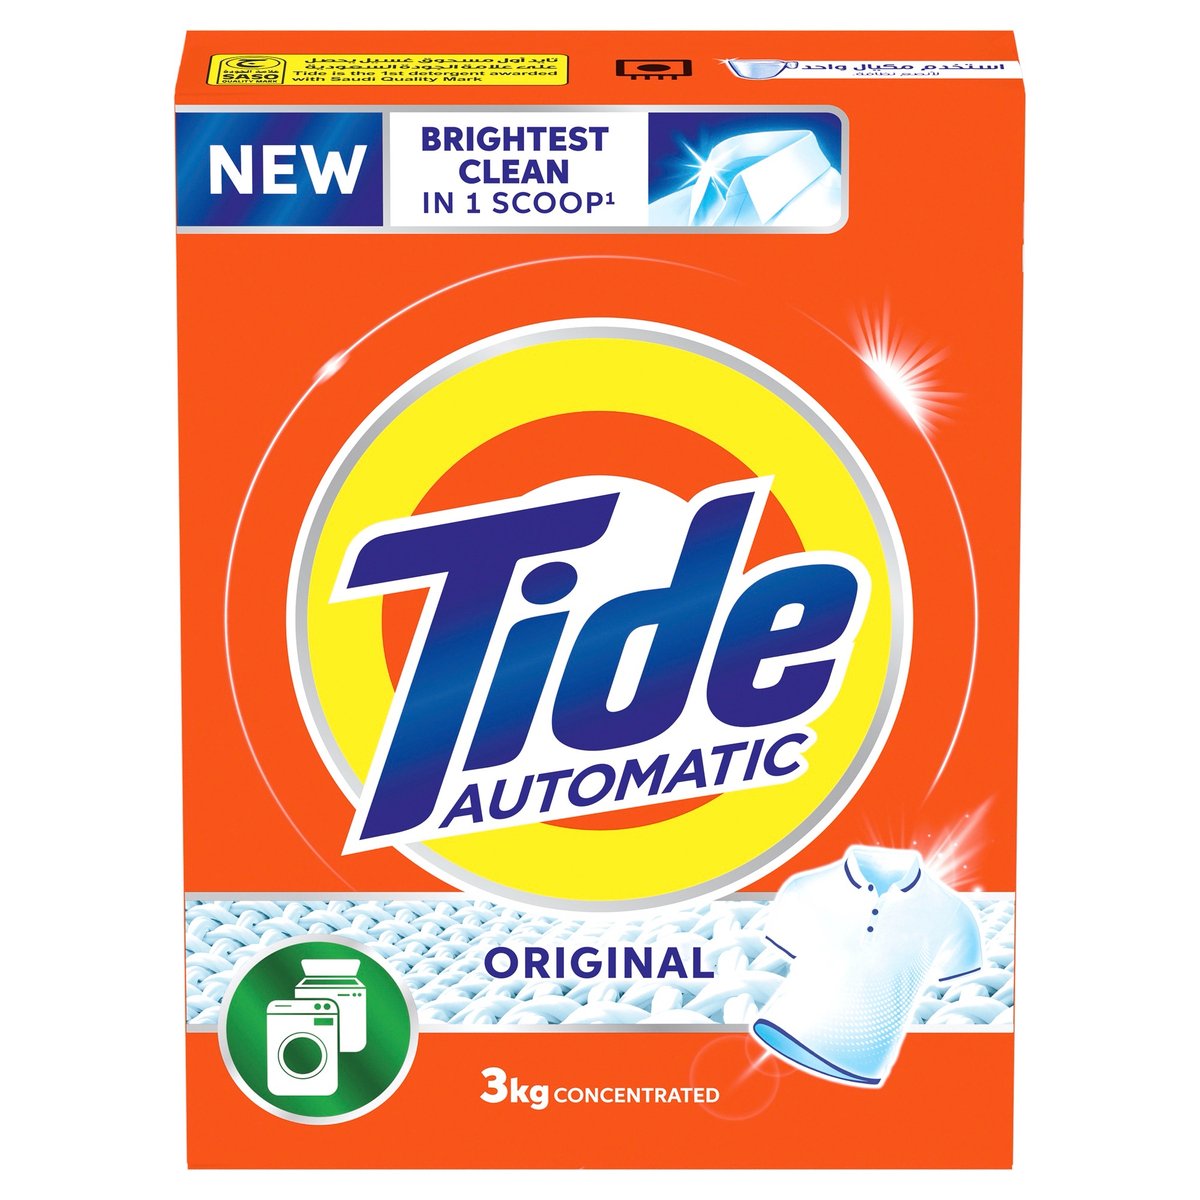 Buy Tide Automatic Powder Laundry Detergent Original Scent 3kg Online at Best Price | Front load washing powders | Lulu UAE in Kuwait